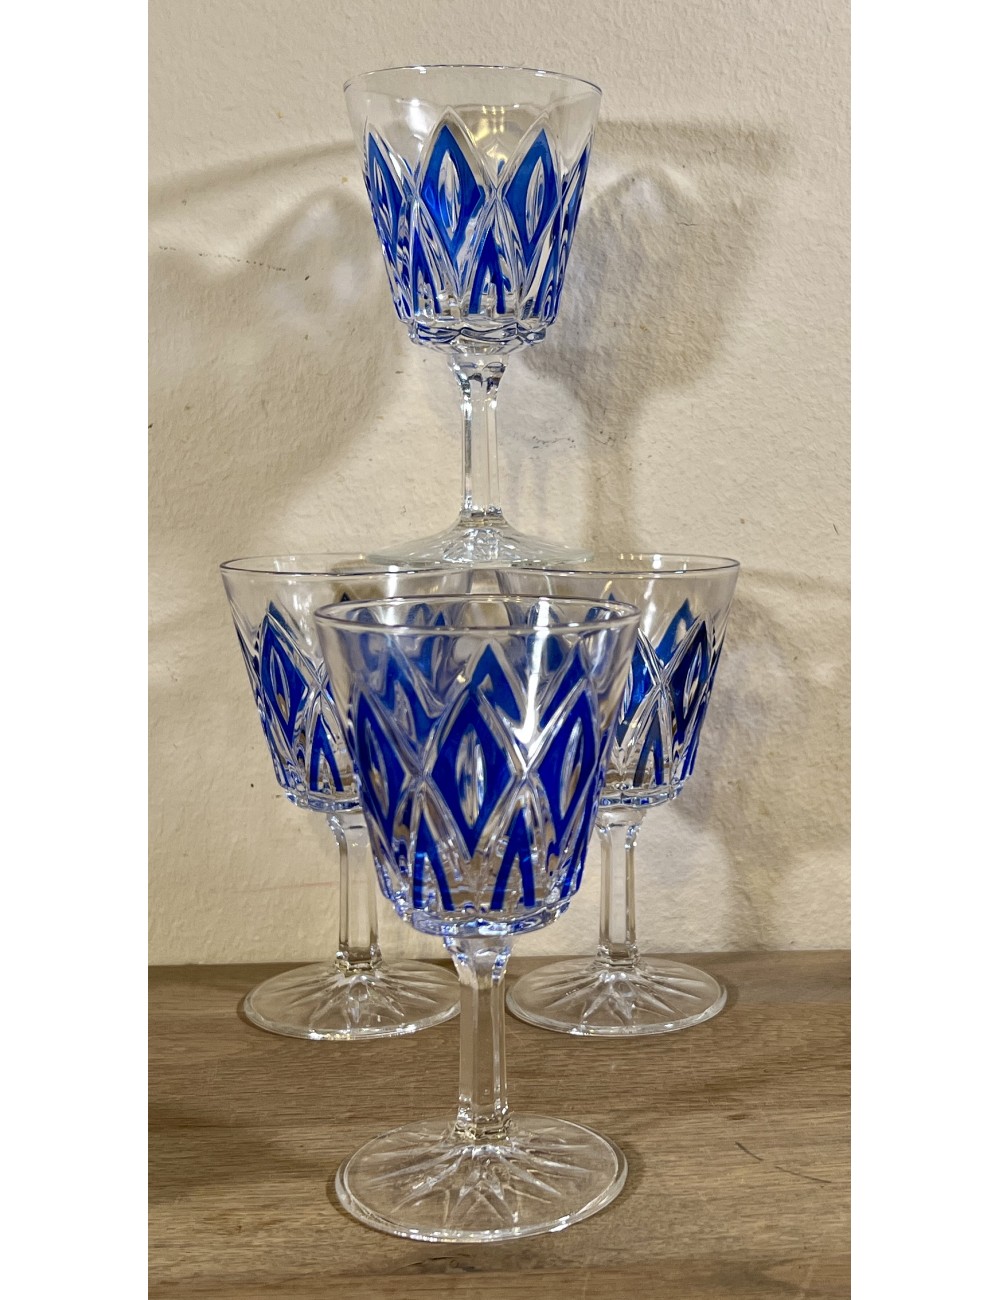 Glass / Wine glass on foot - large model - VMC Reims (Verreries Mècaniques Champenoises) - Harlequin in blue